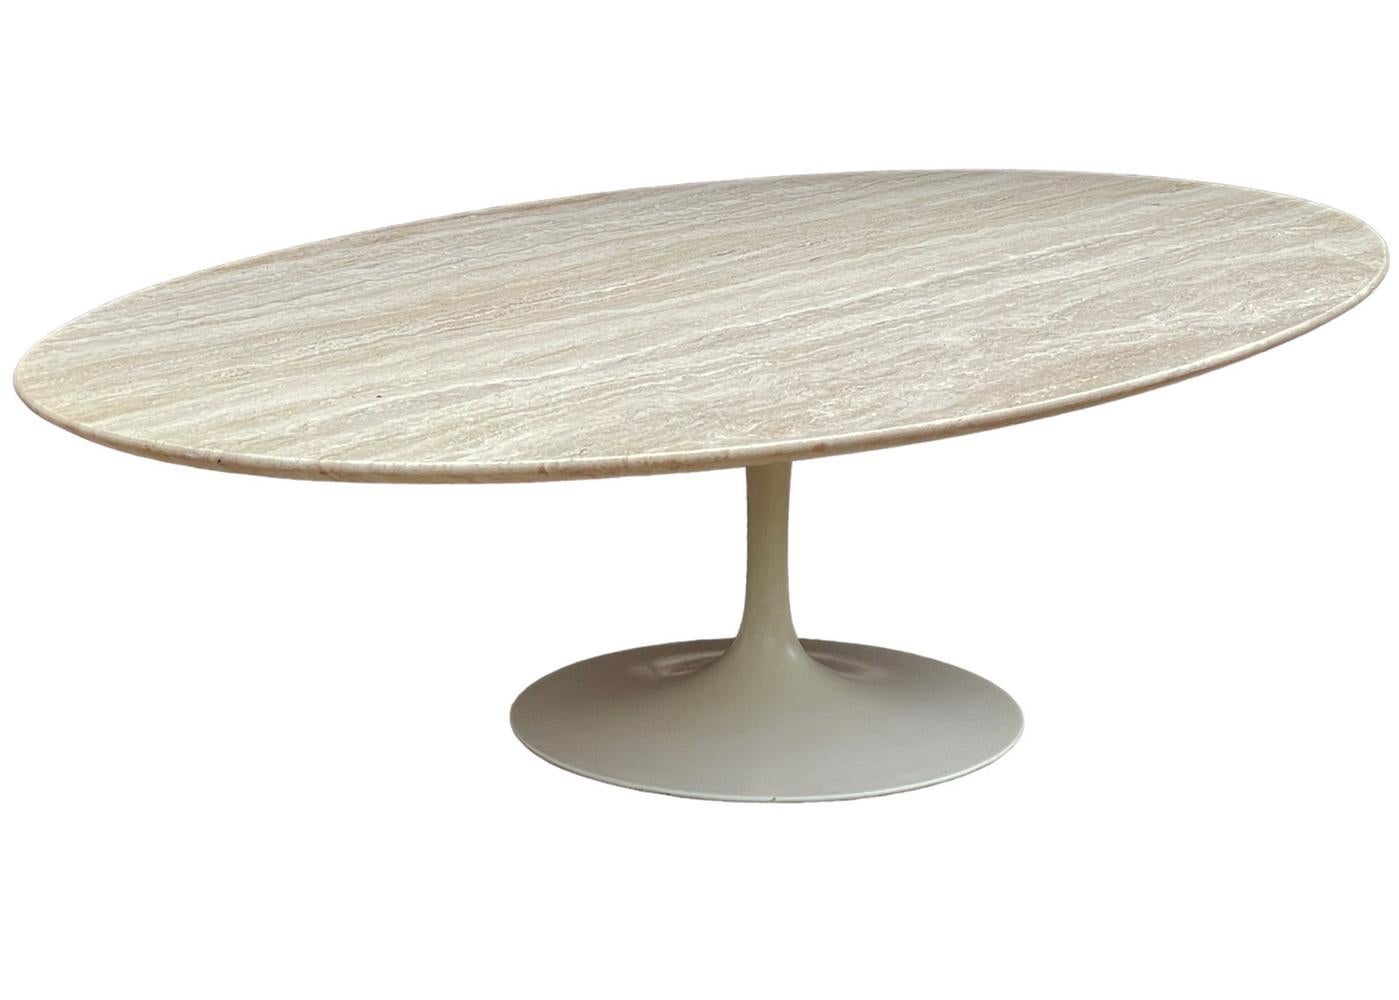 Early made oval coffee table designed by Eero Saarinen and produced by Knoll in the 60's. Excellent overall condition with beautiful beige travertine slab type and powder coated tulip base. 